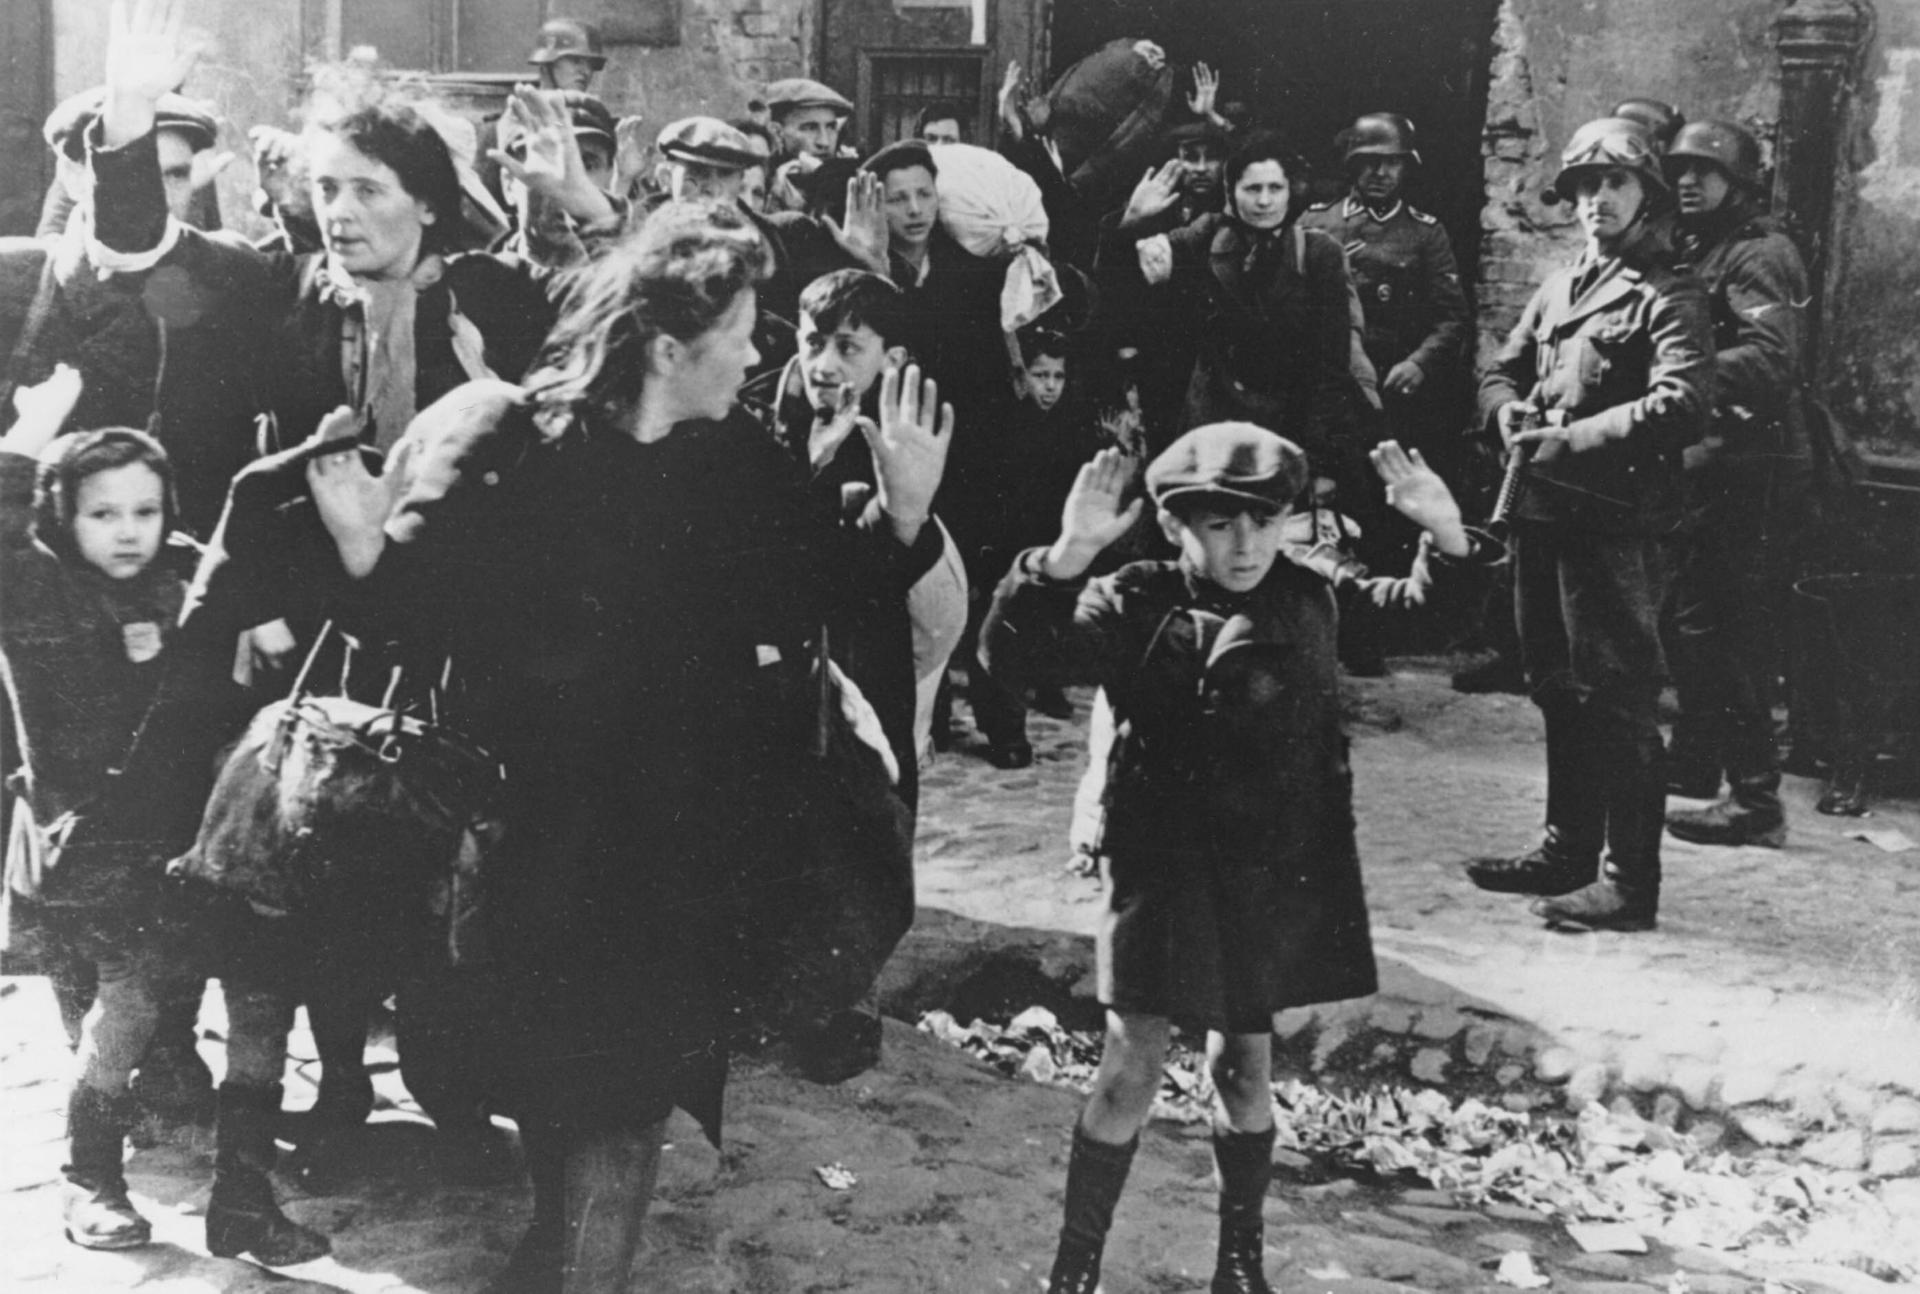 A group of Jewish people is escorted from the Warsaw Ghetto by German soldiers on April 19, 1943.